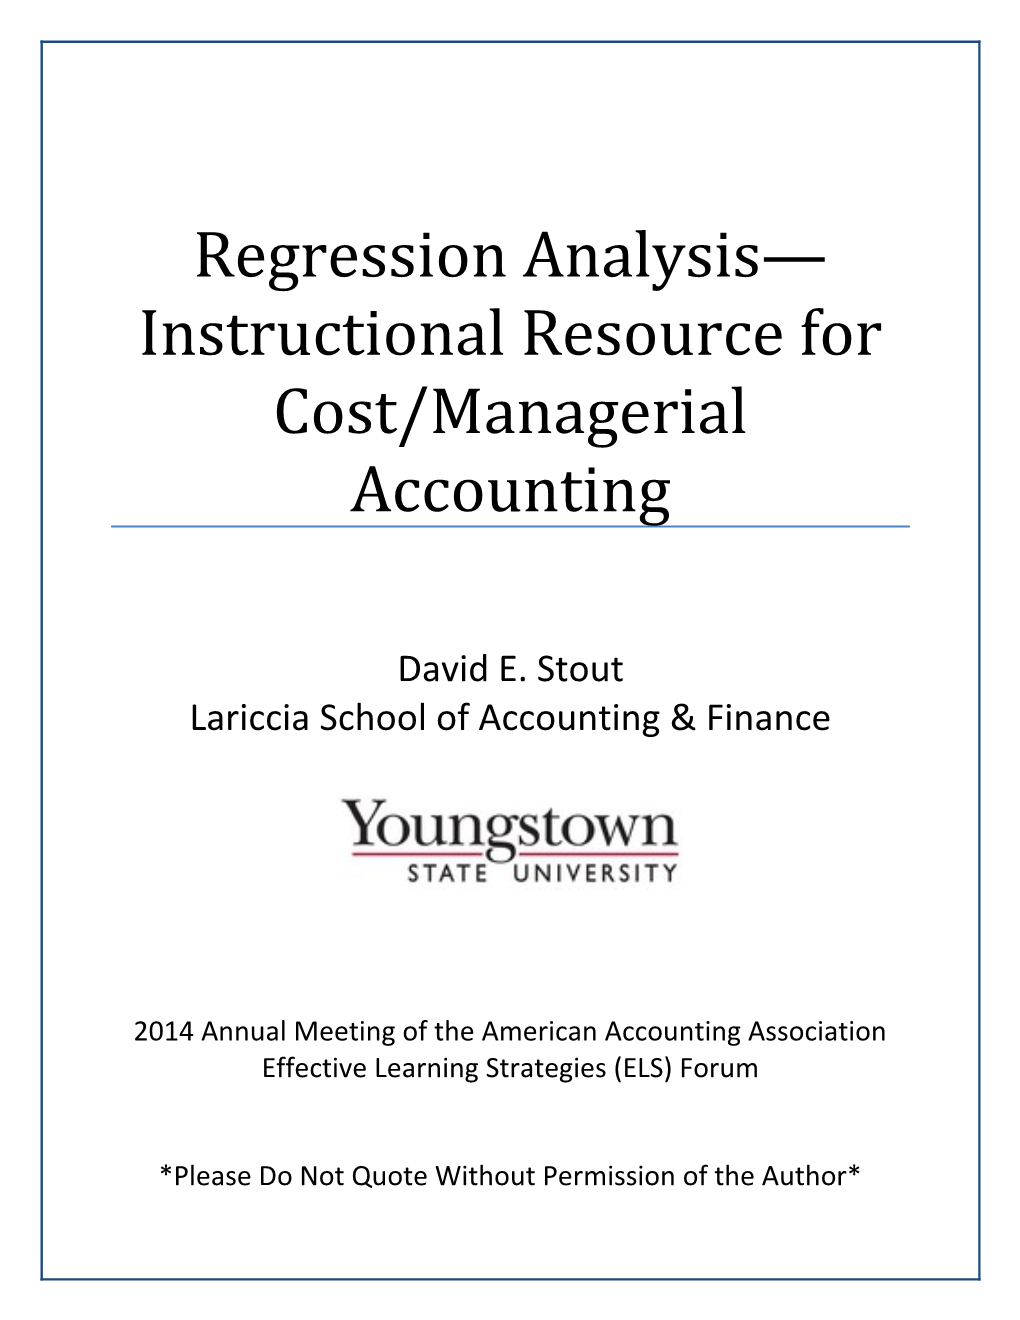 Regression Analysis Instructional Resource for Cost/Managerial Accounting